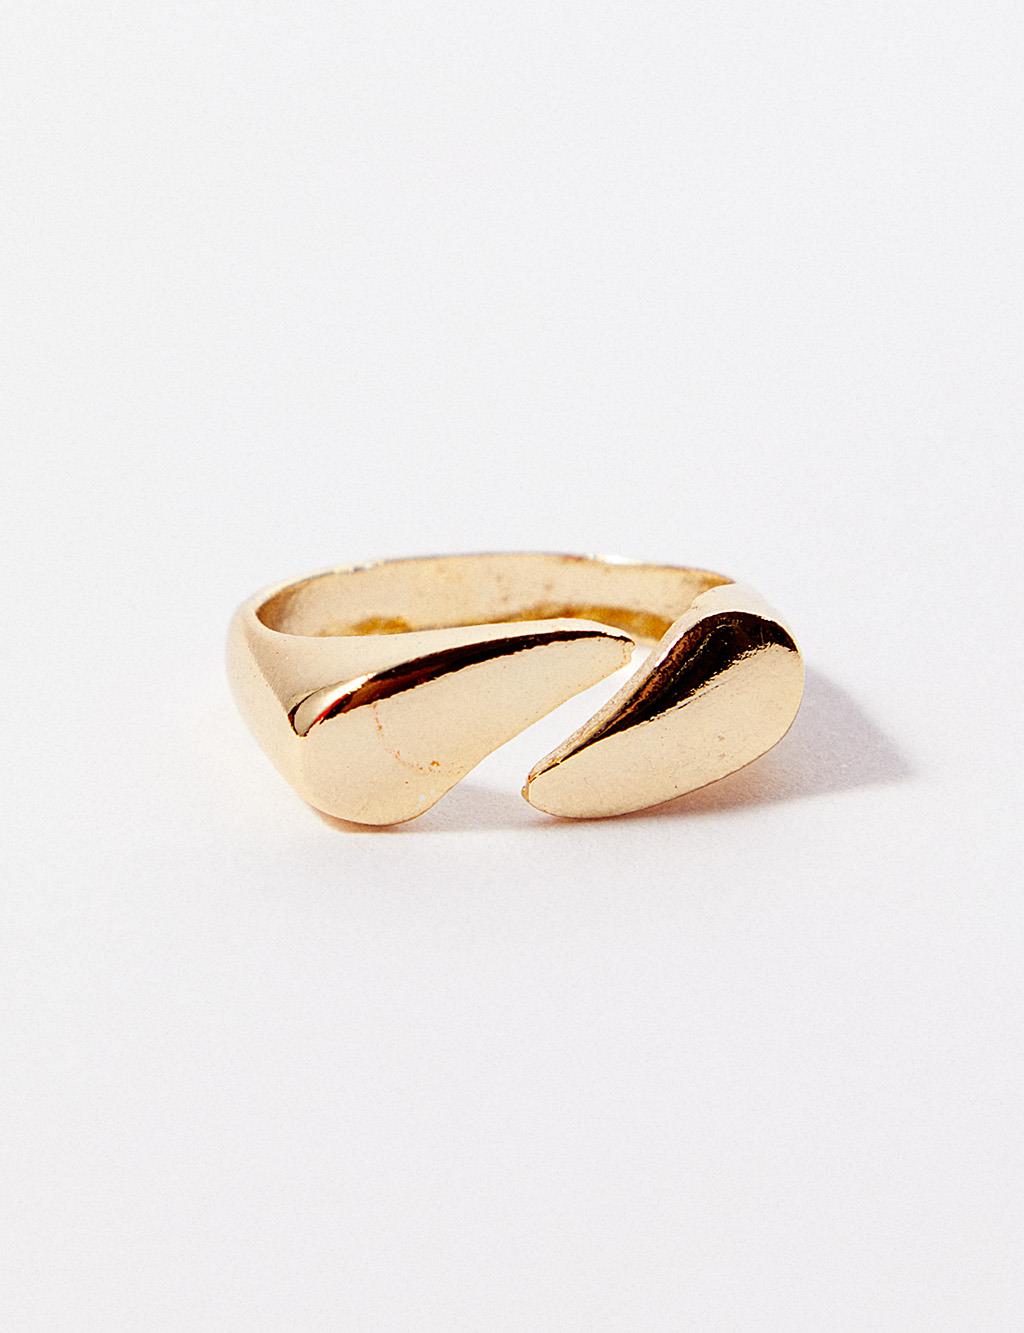 Adjustable Metallic Ring Gold Color